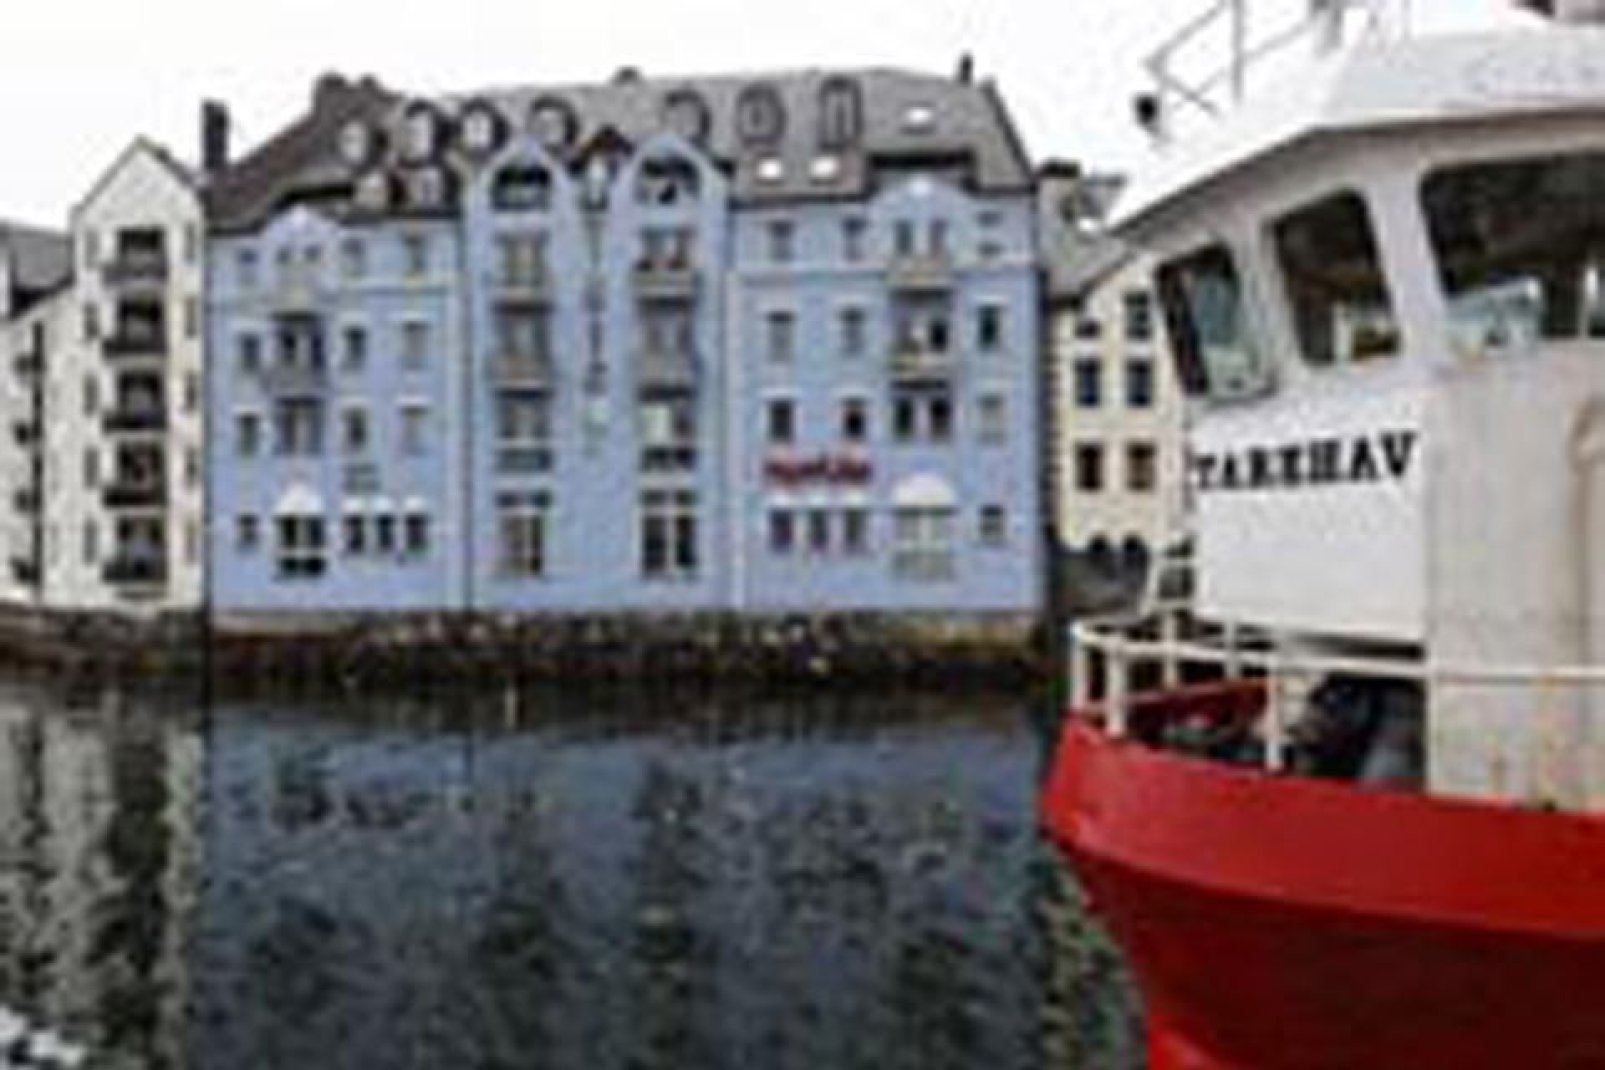 Alesund is one of the stops on the famous Hurtigruten, the Norwegian coastal express.